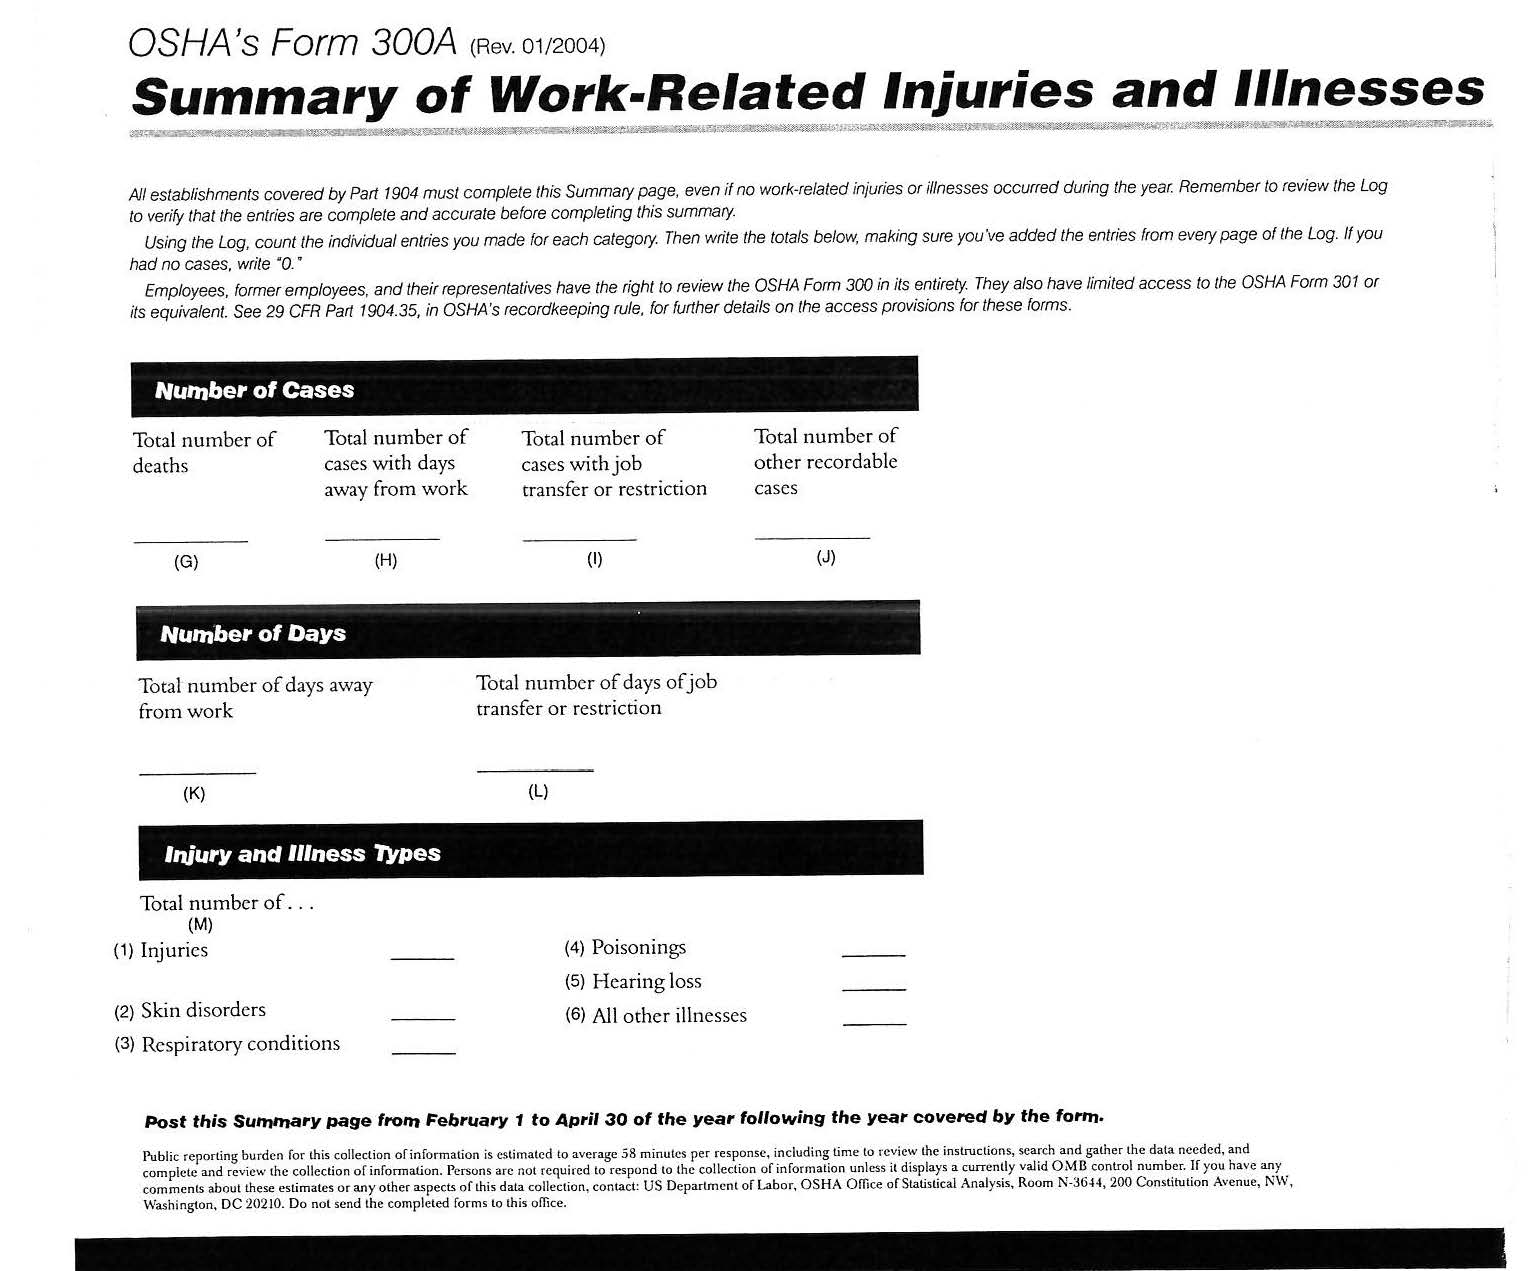 summary of work-related injuries and illnesses2